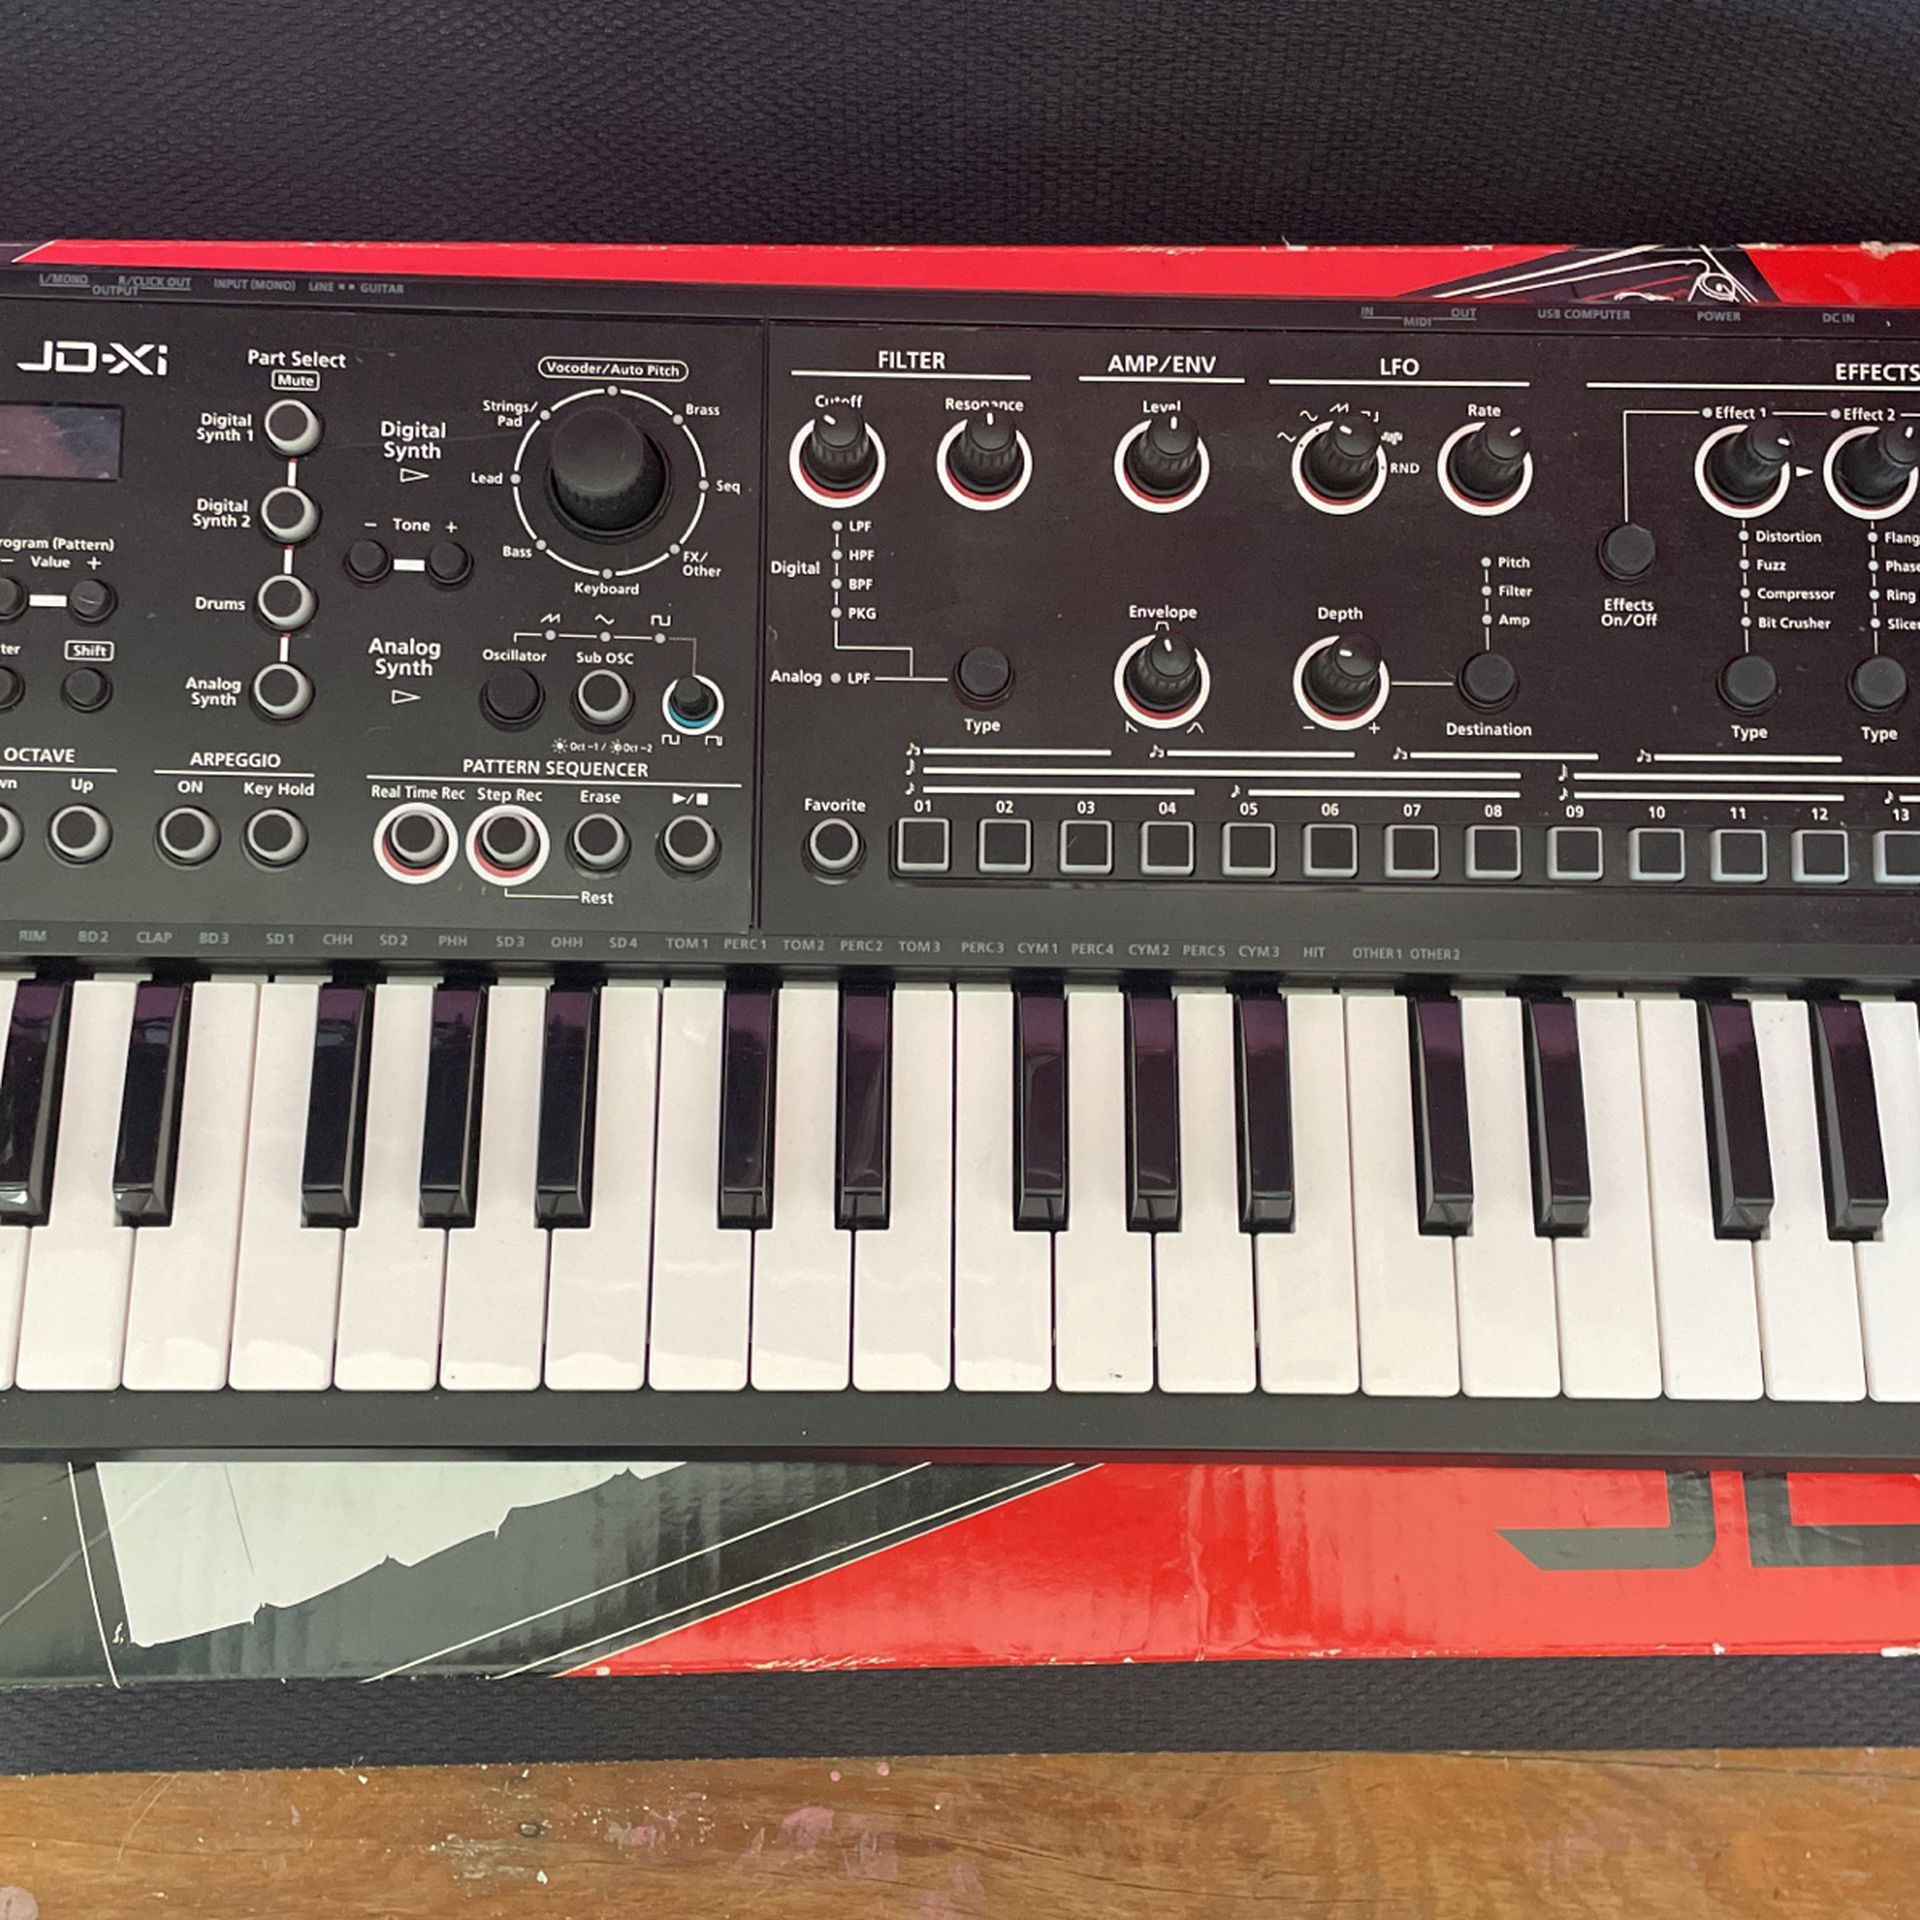 Roland Jd-xi JDXI synth for Sale in Denver, CO - OfferUp